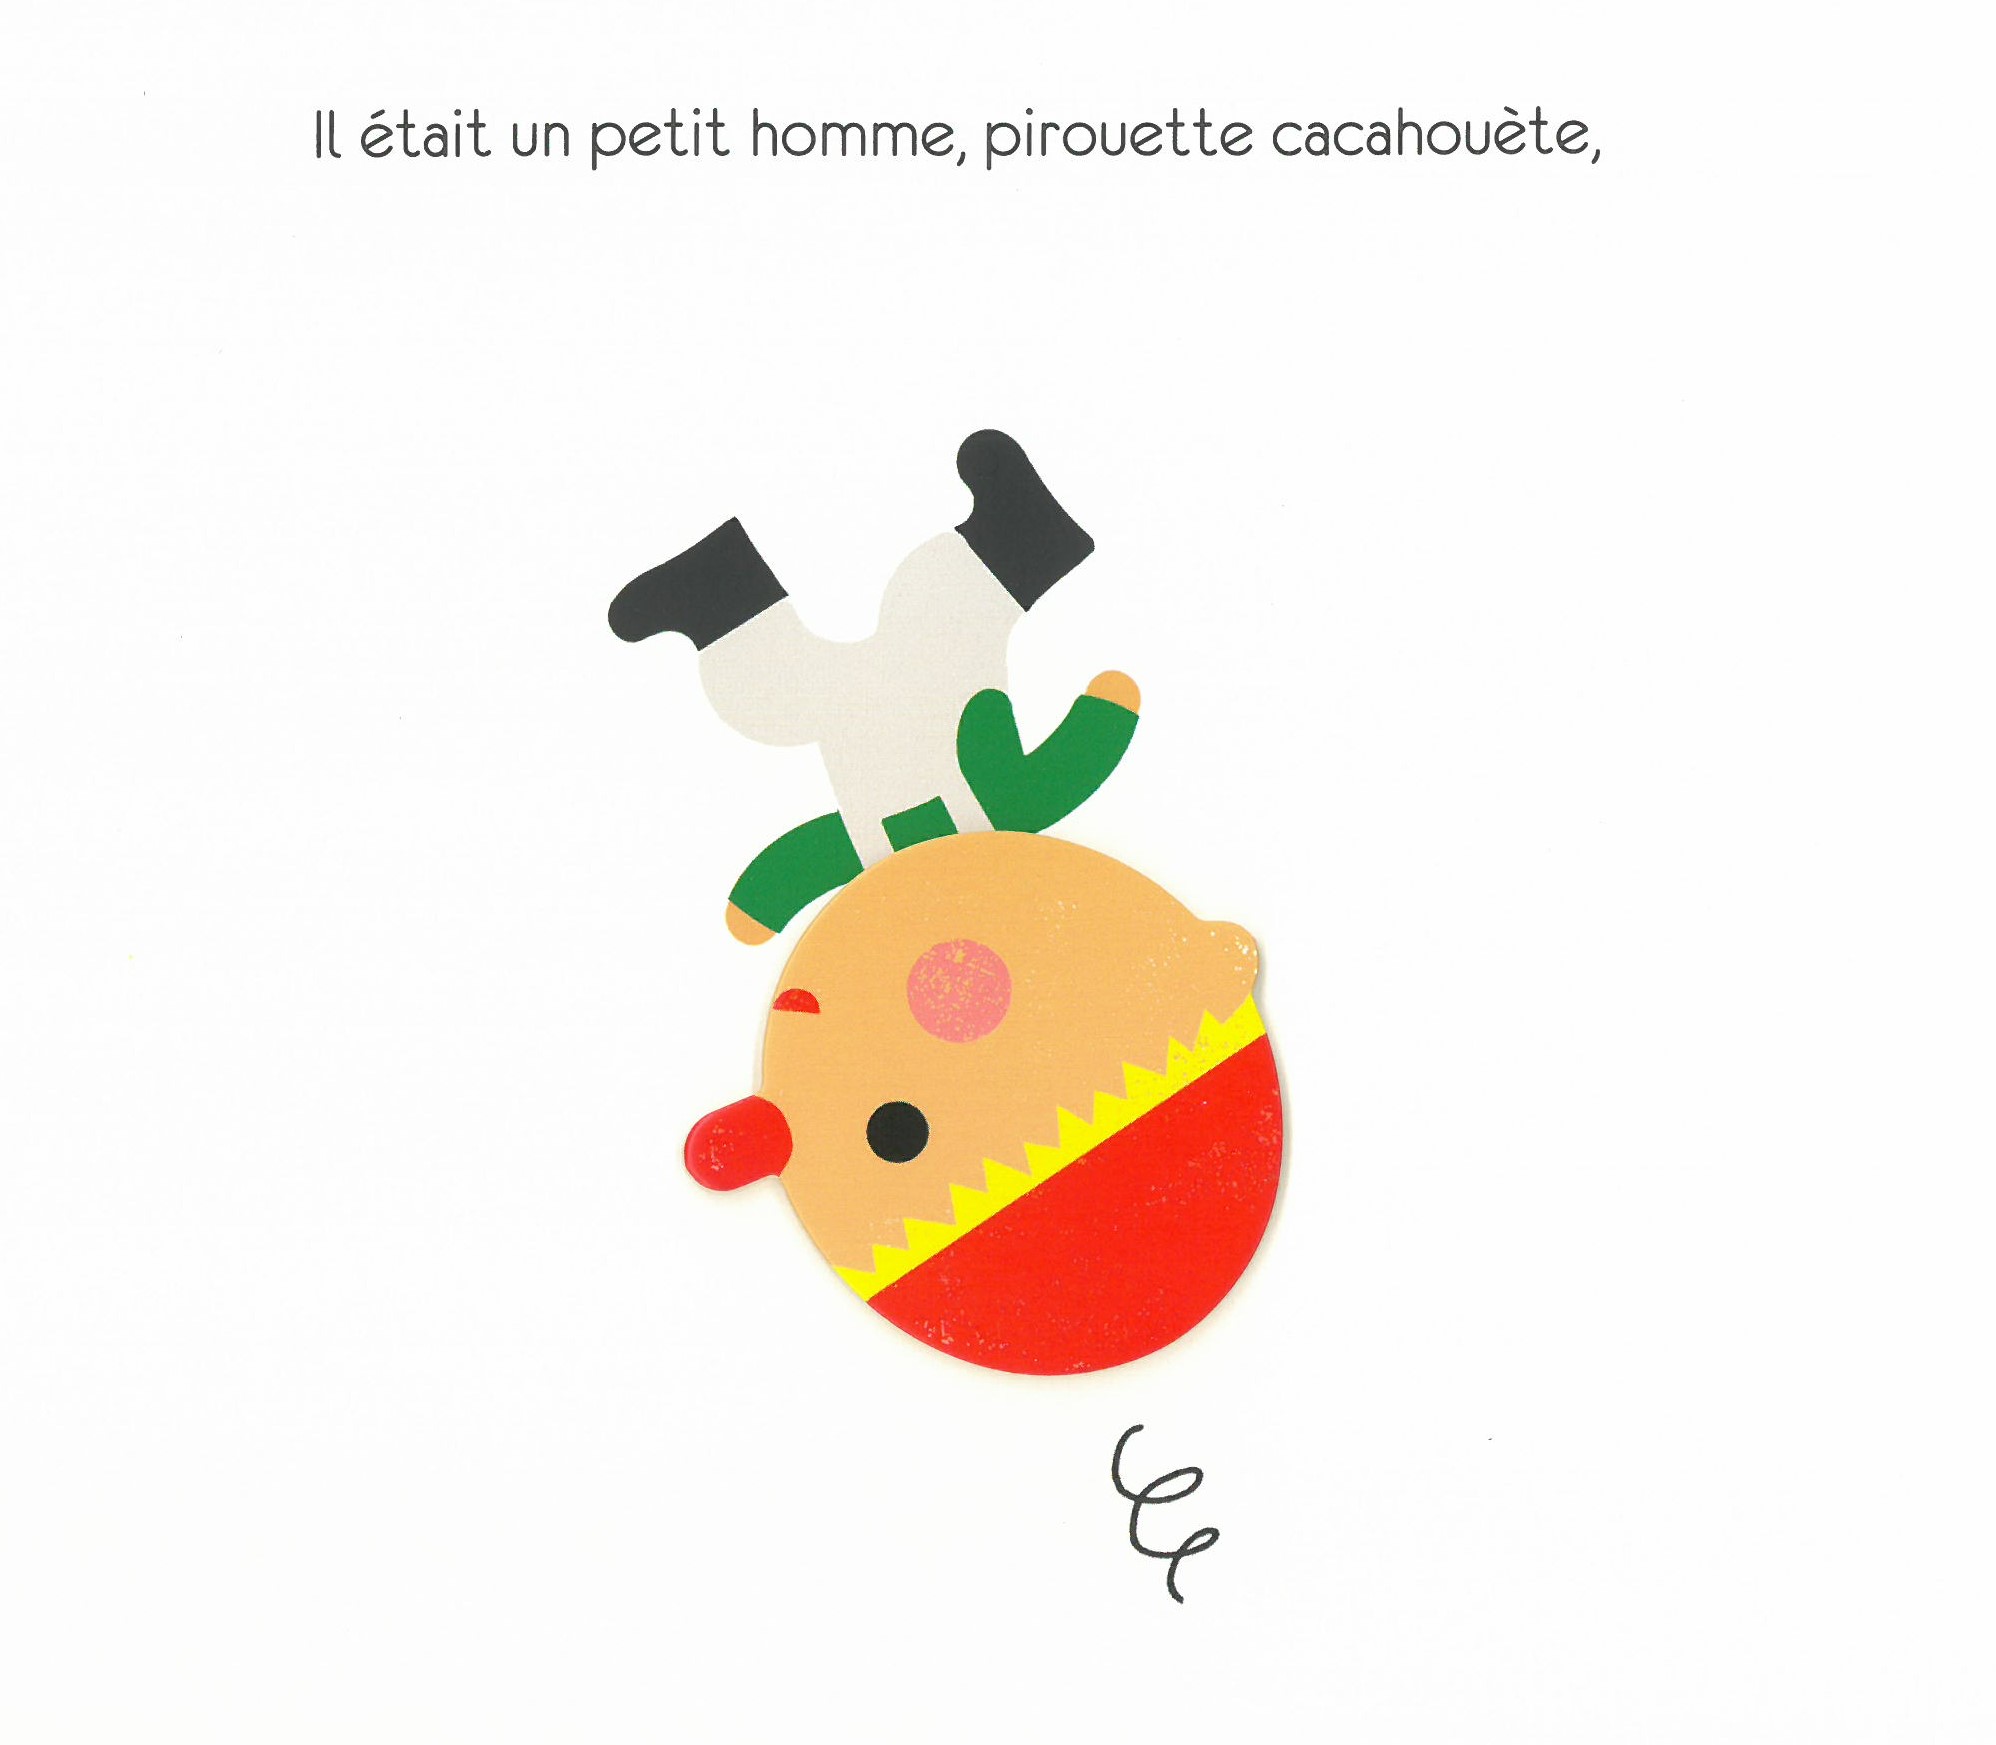 Pirouette Cacahouete